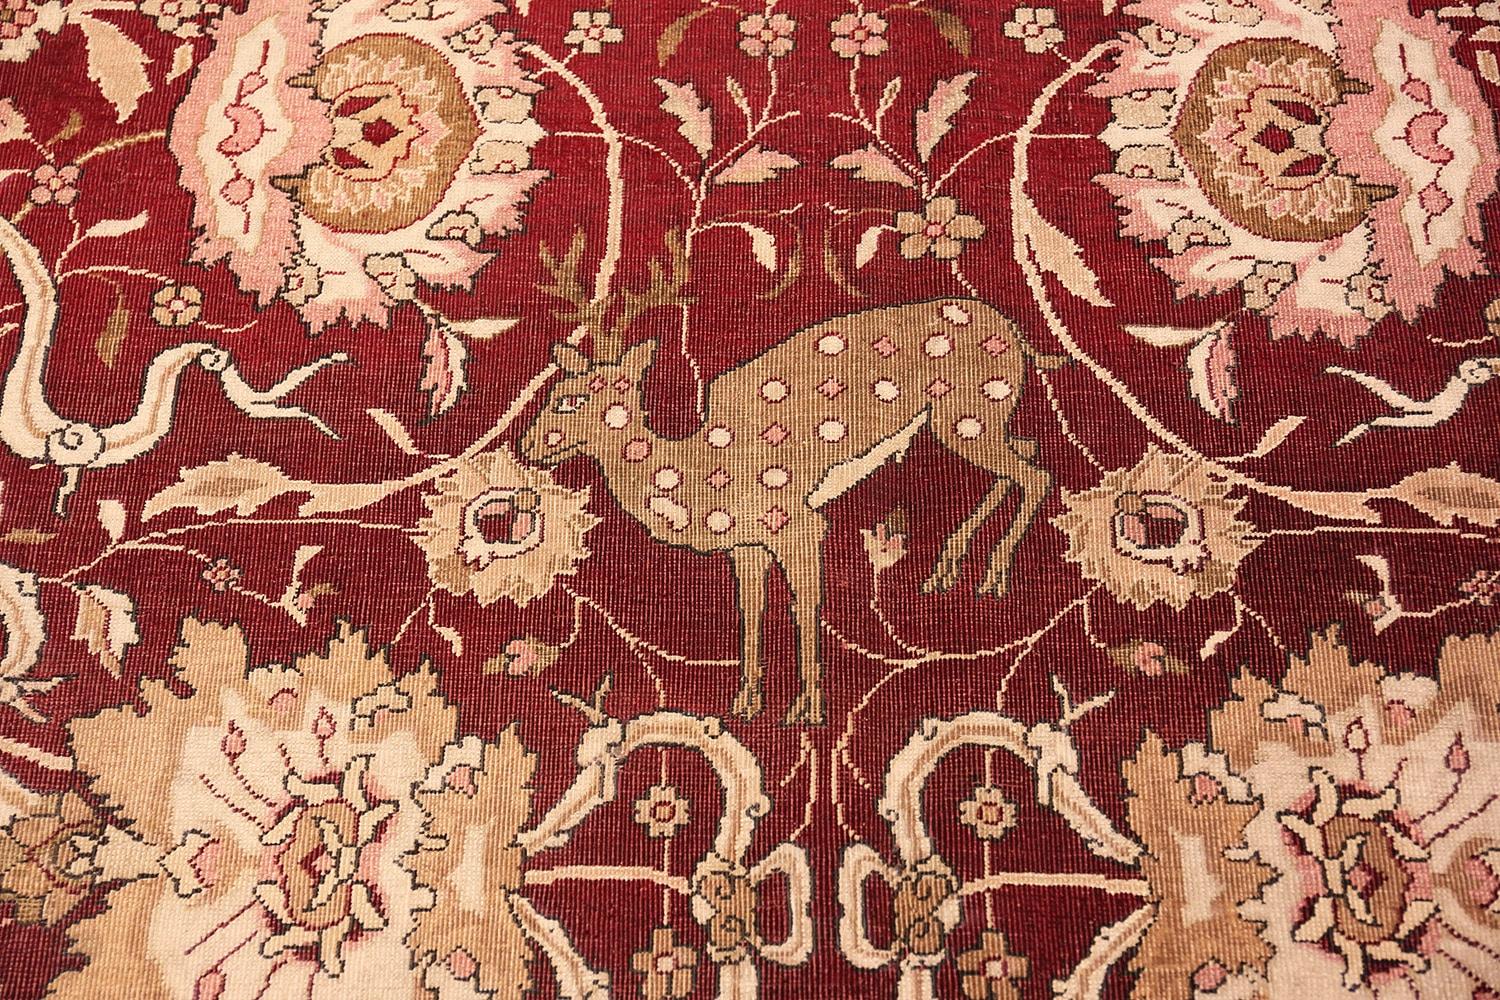 Animal Patterned Room Sized Antique Indian Agra Rug. Size: 10 ft x 13 ft 8 in 4